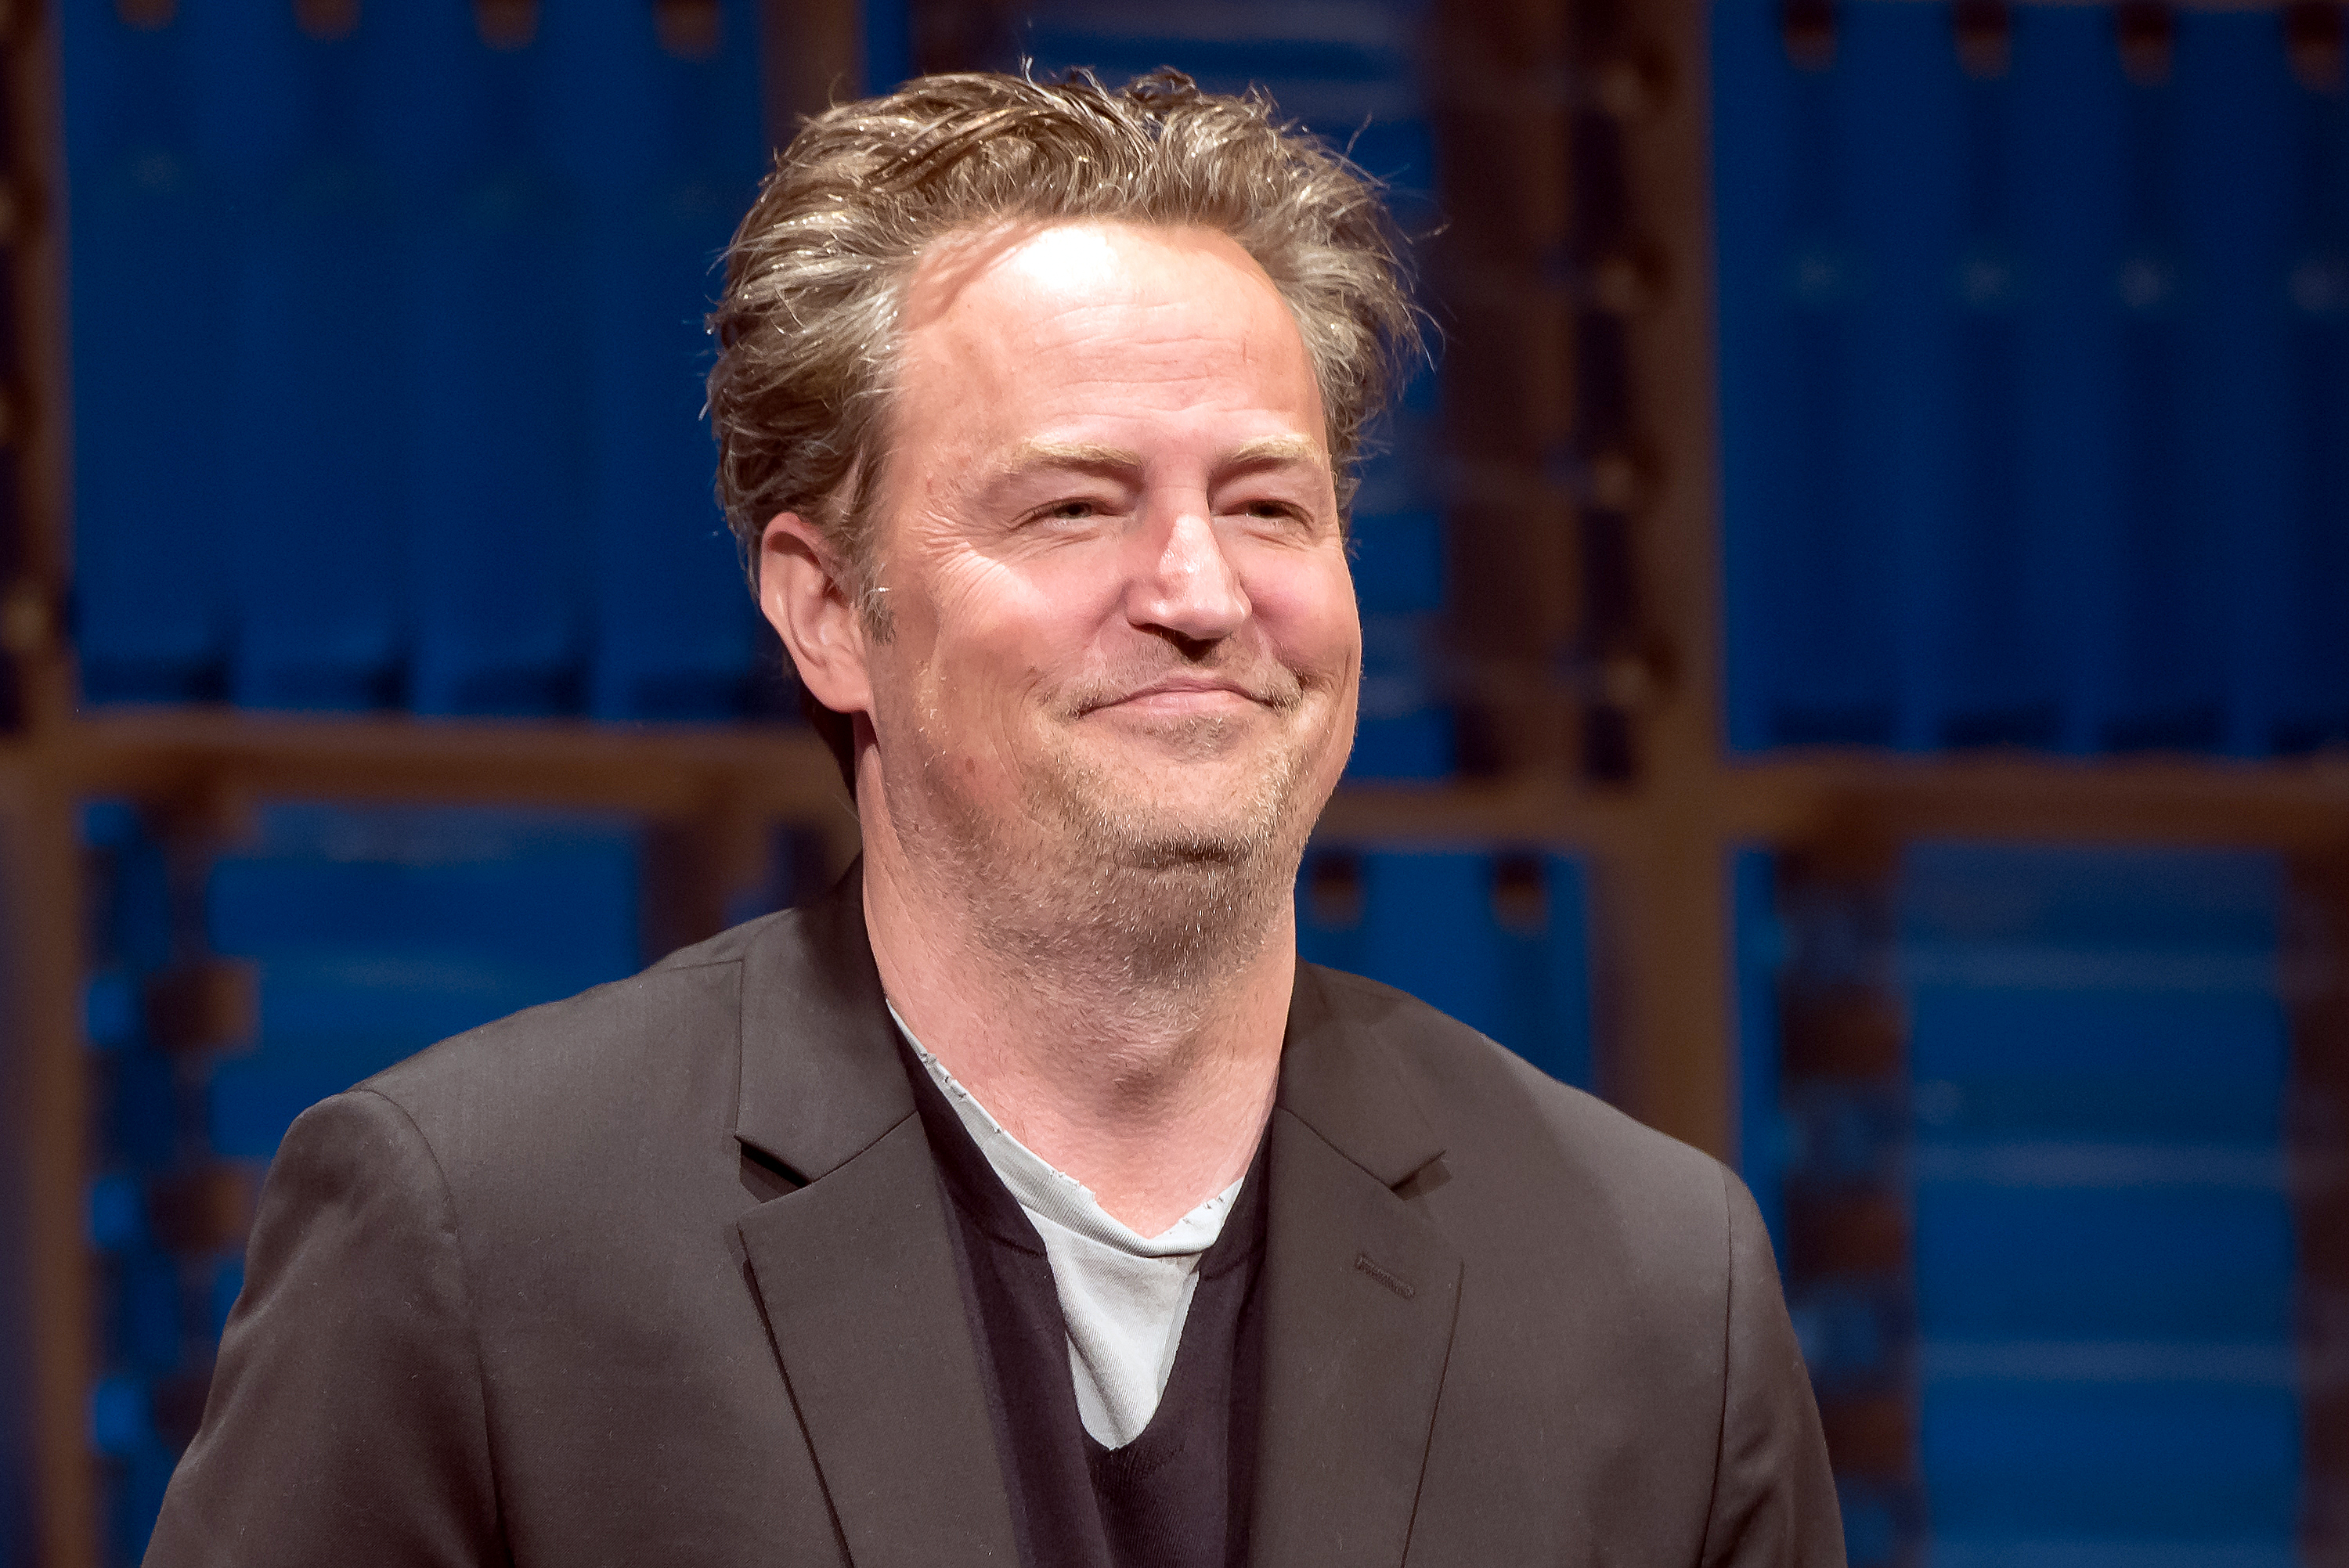 Matthew Perry on stage during the opening night curtain call of "The End Of Longing" at Lucille Lortel Theatre on June 5, 2017, in New York City | Source: Getty Images